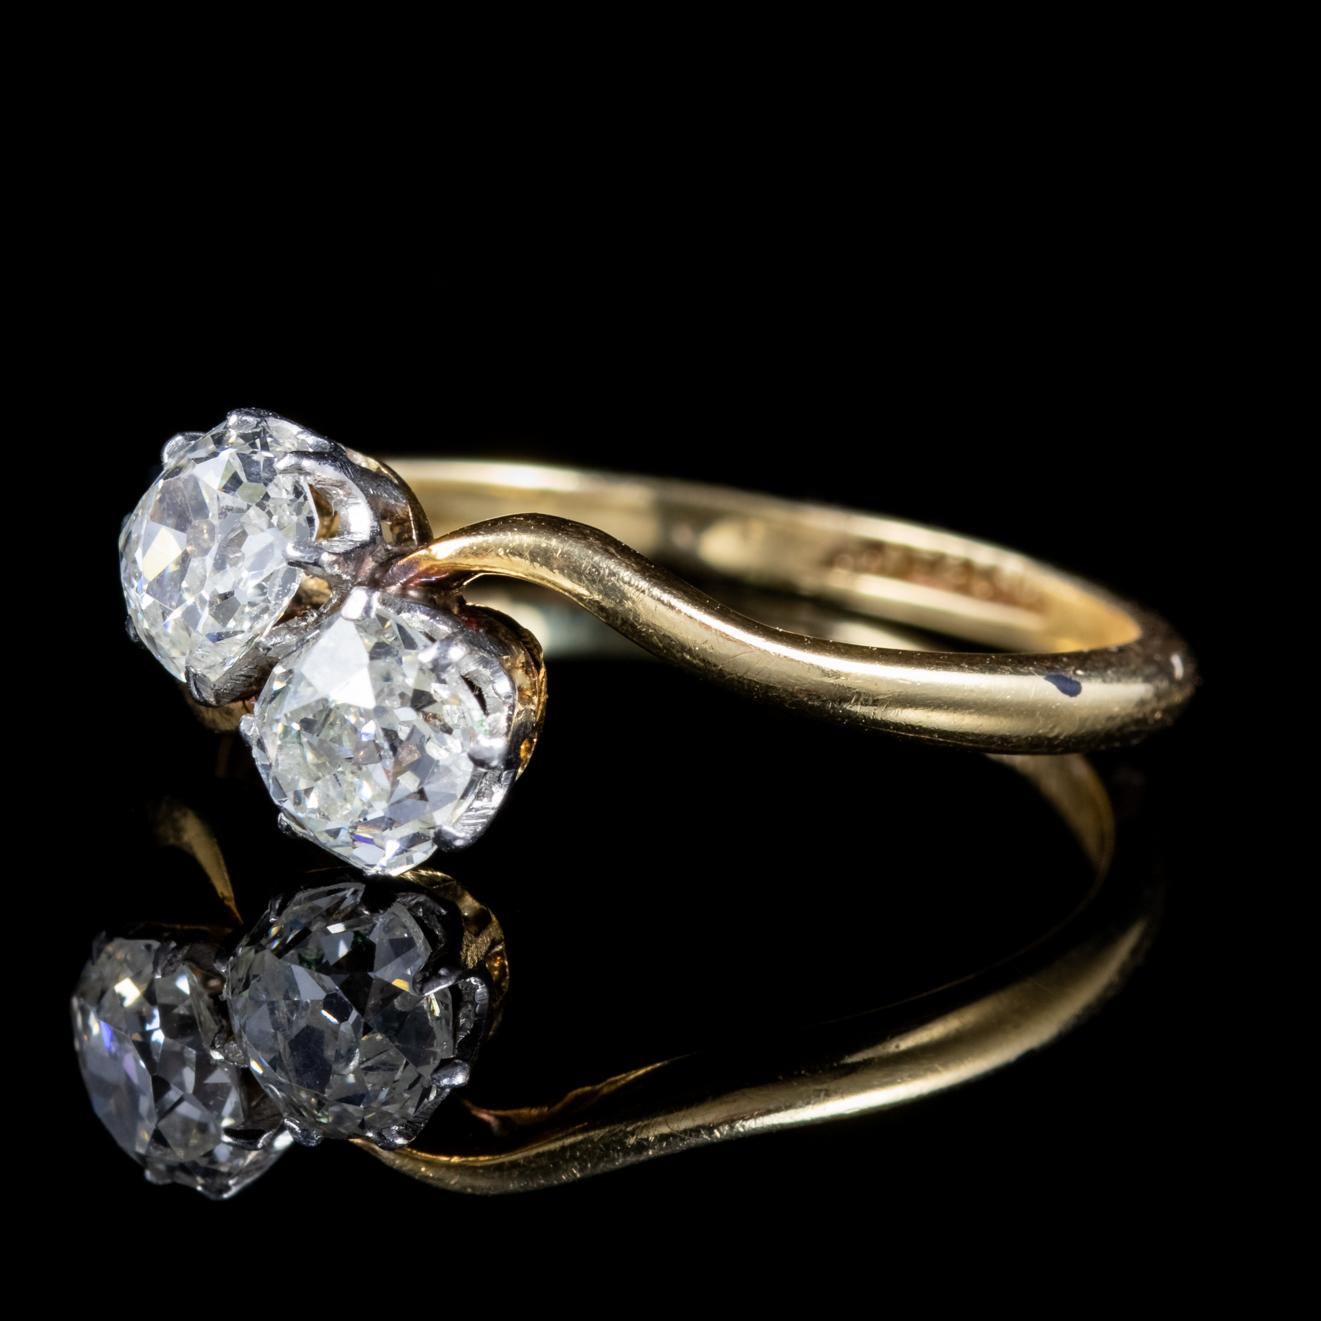 A spectacular antique Edwardian ring set with two stunning 0.40ct old European cut Diamonds which sparkle with immense life and brilliance.

The Edwardian period was also known as the ‘Beautiful era’ and engagement rings were romantic and elegant in